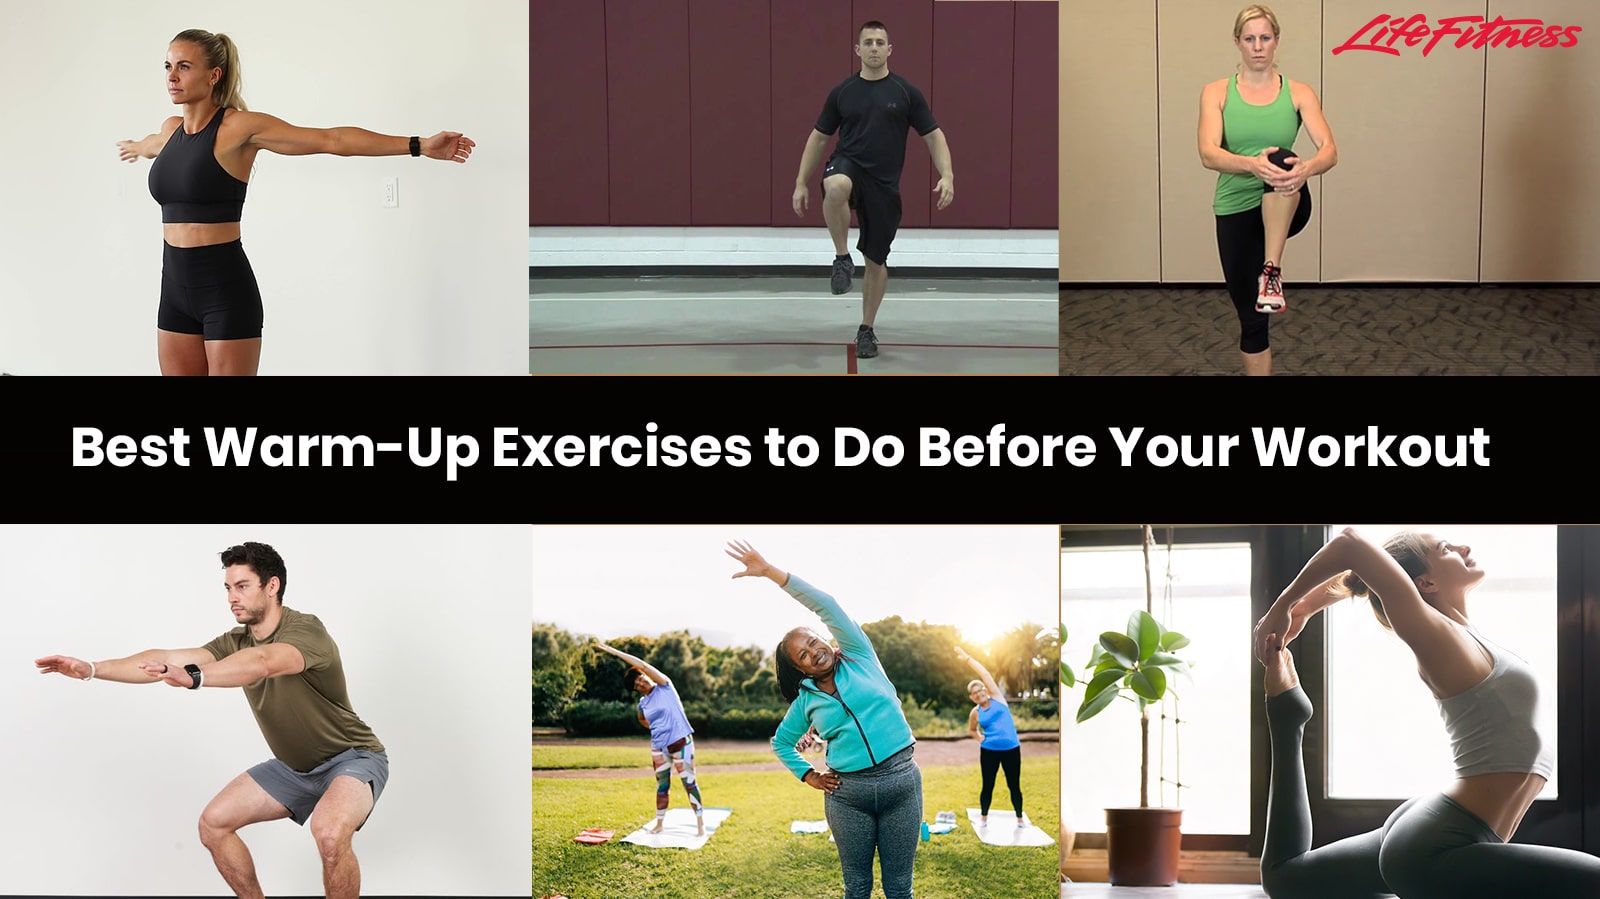 Best Warm-Up Exercises to Do Before Your Workout